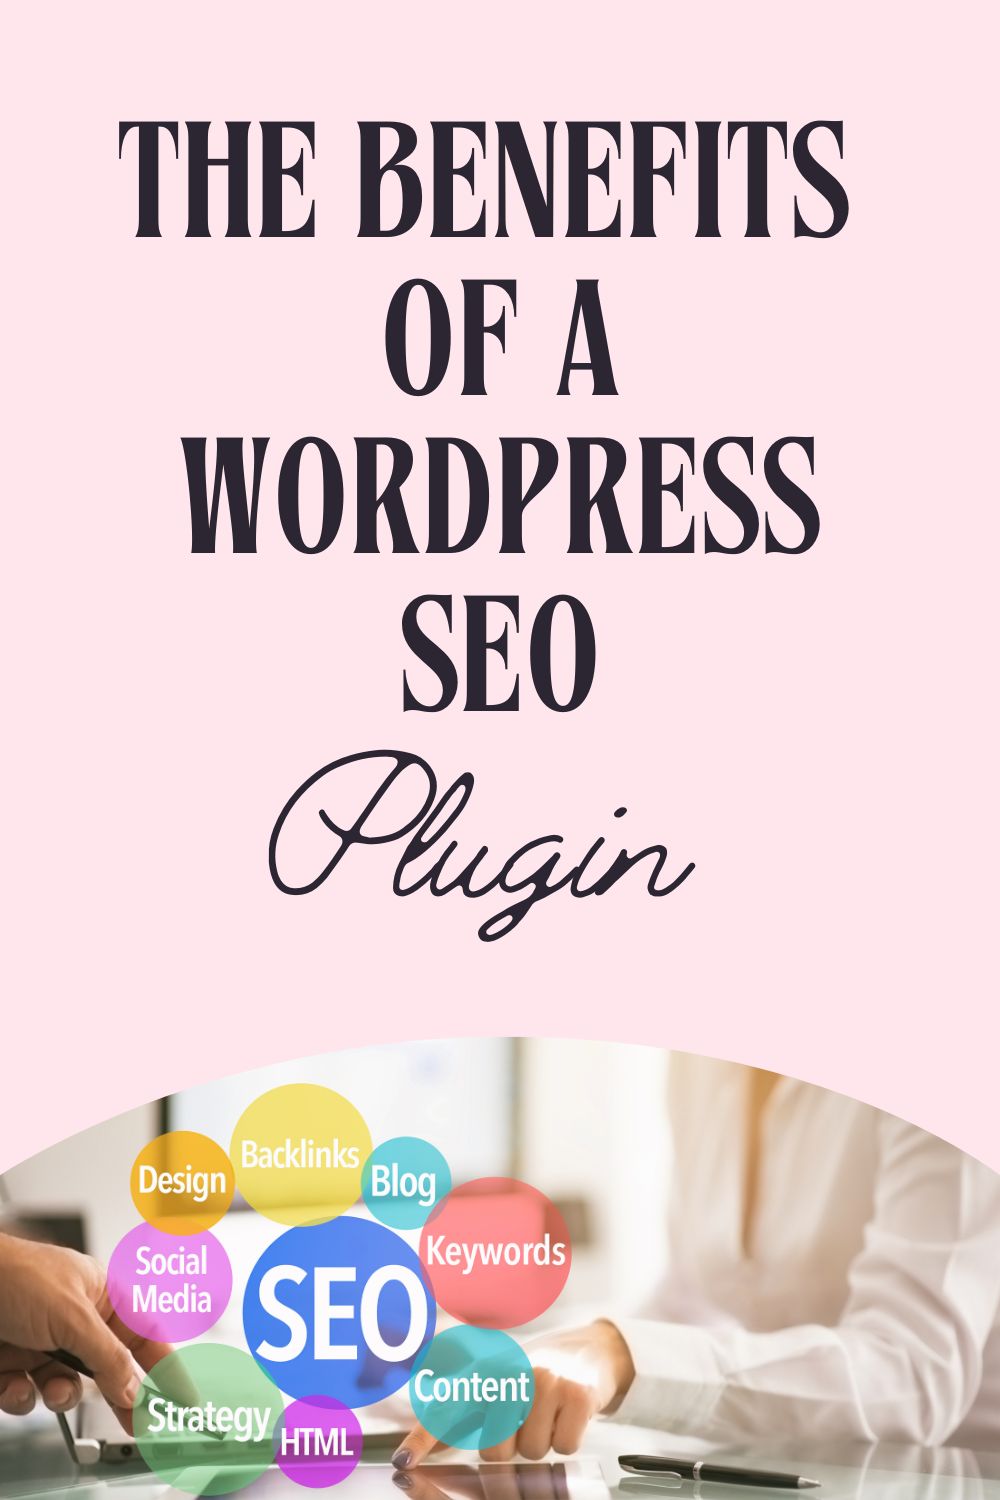 Read about the benefits of WordPress SEO plugins! Enhance visibility, optimise content, and boost rankings with these essential tools.